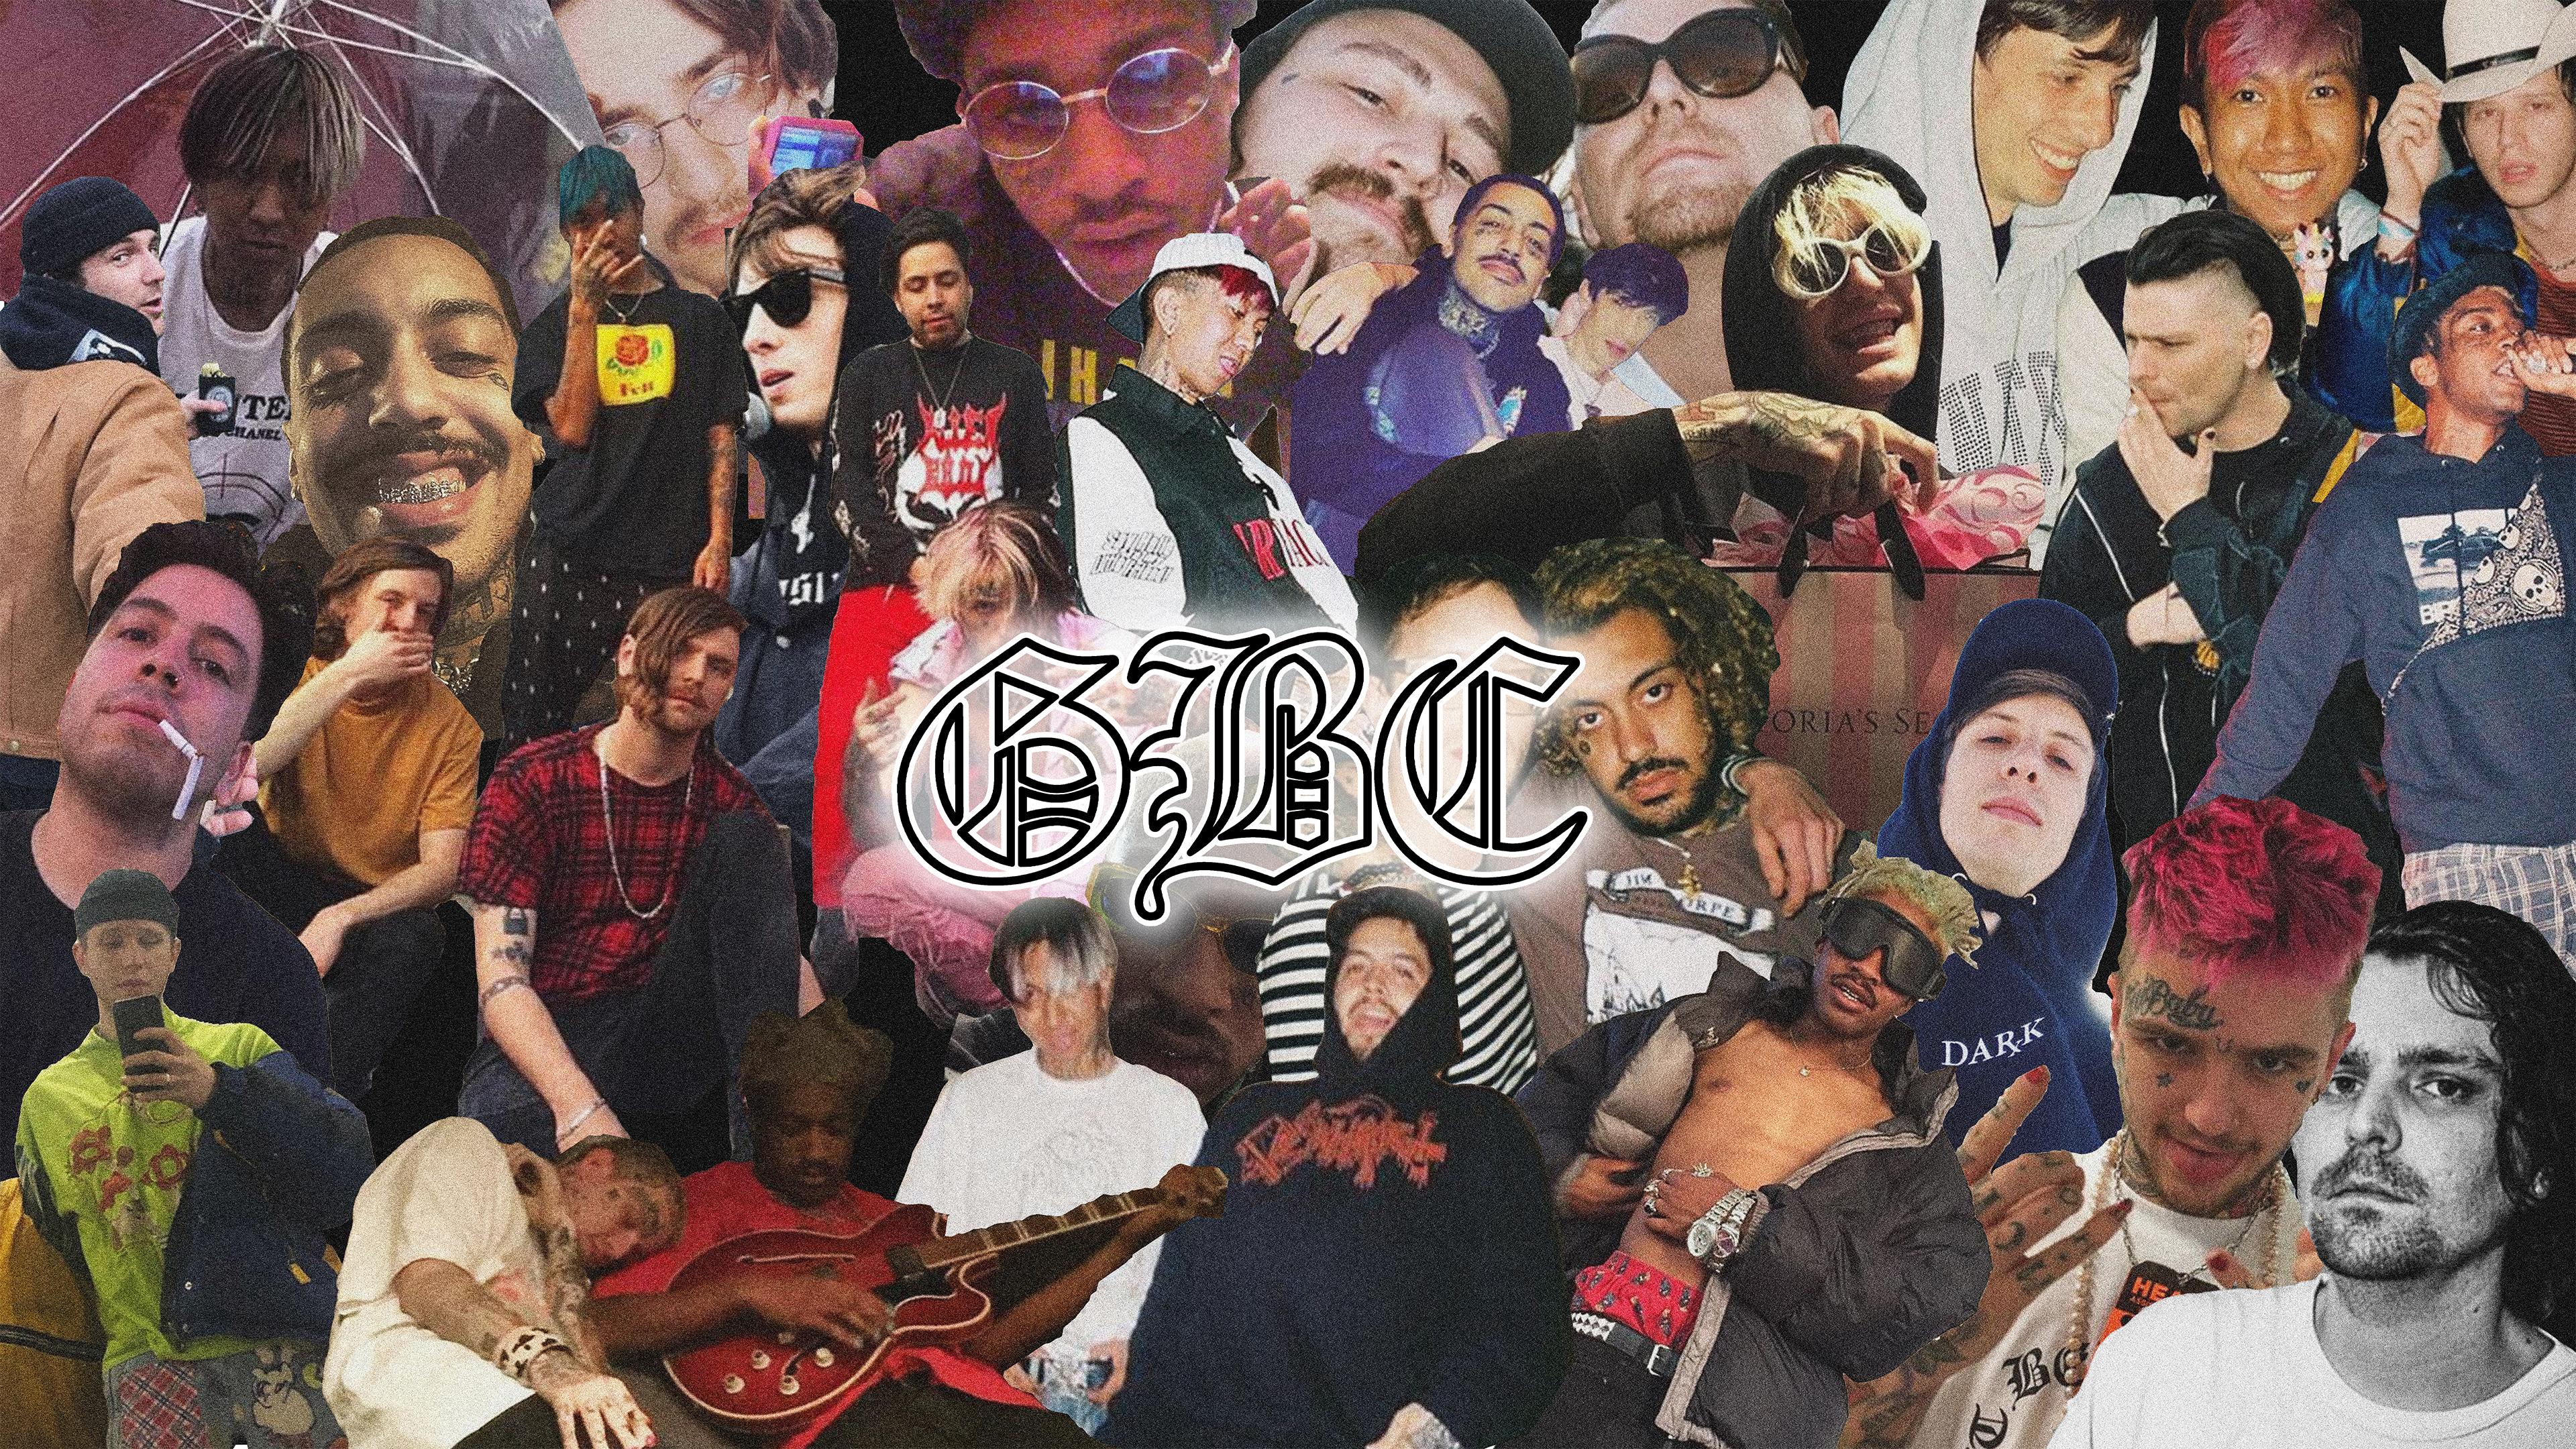 I made this because Ive lost my last wallpaper  rGothBoiClique